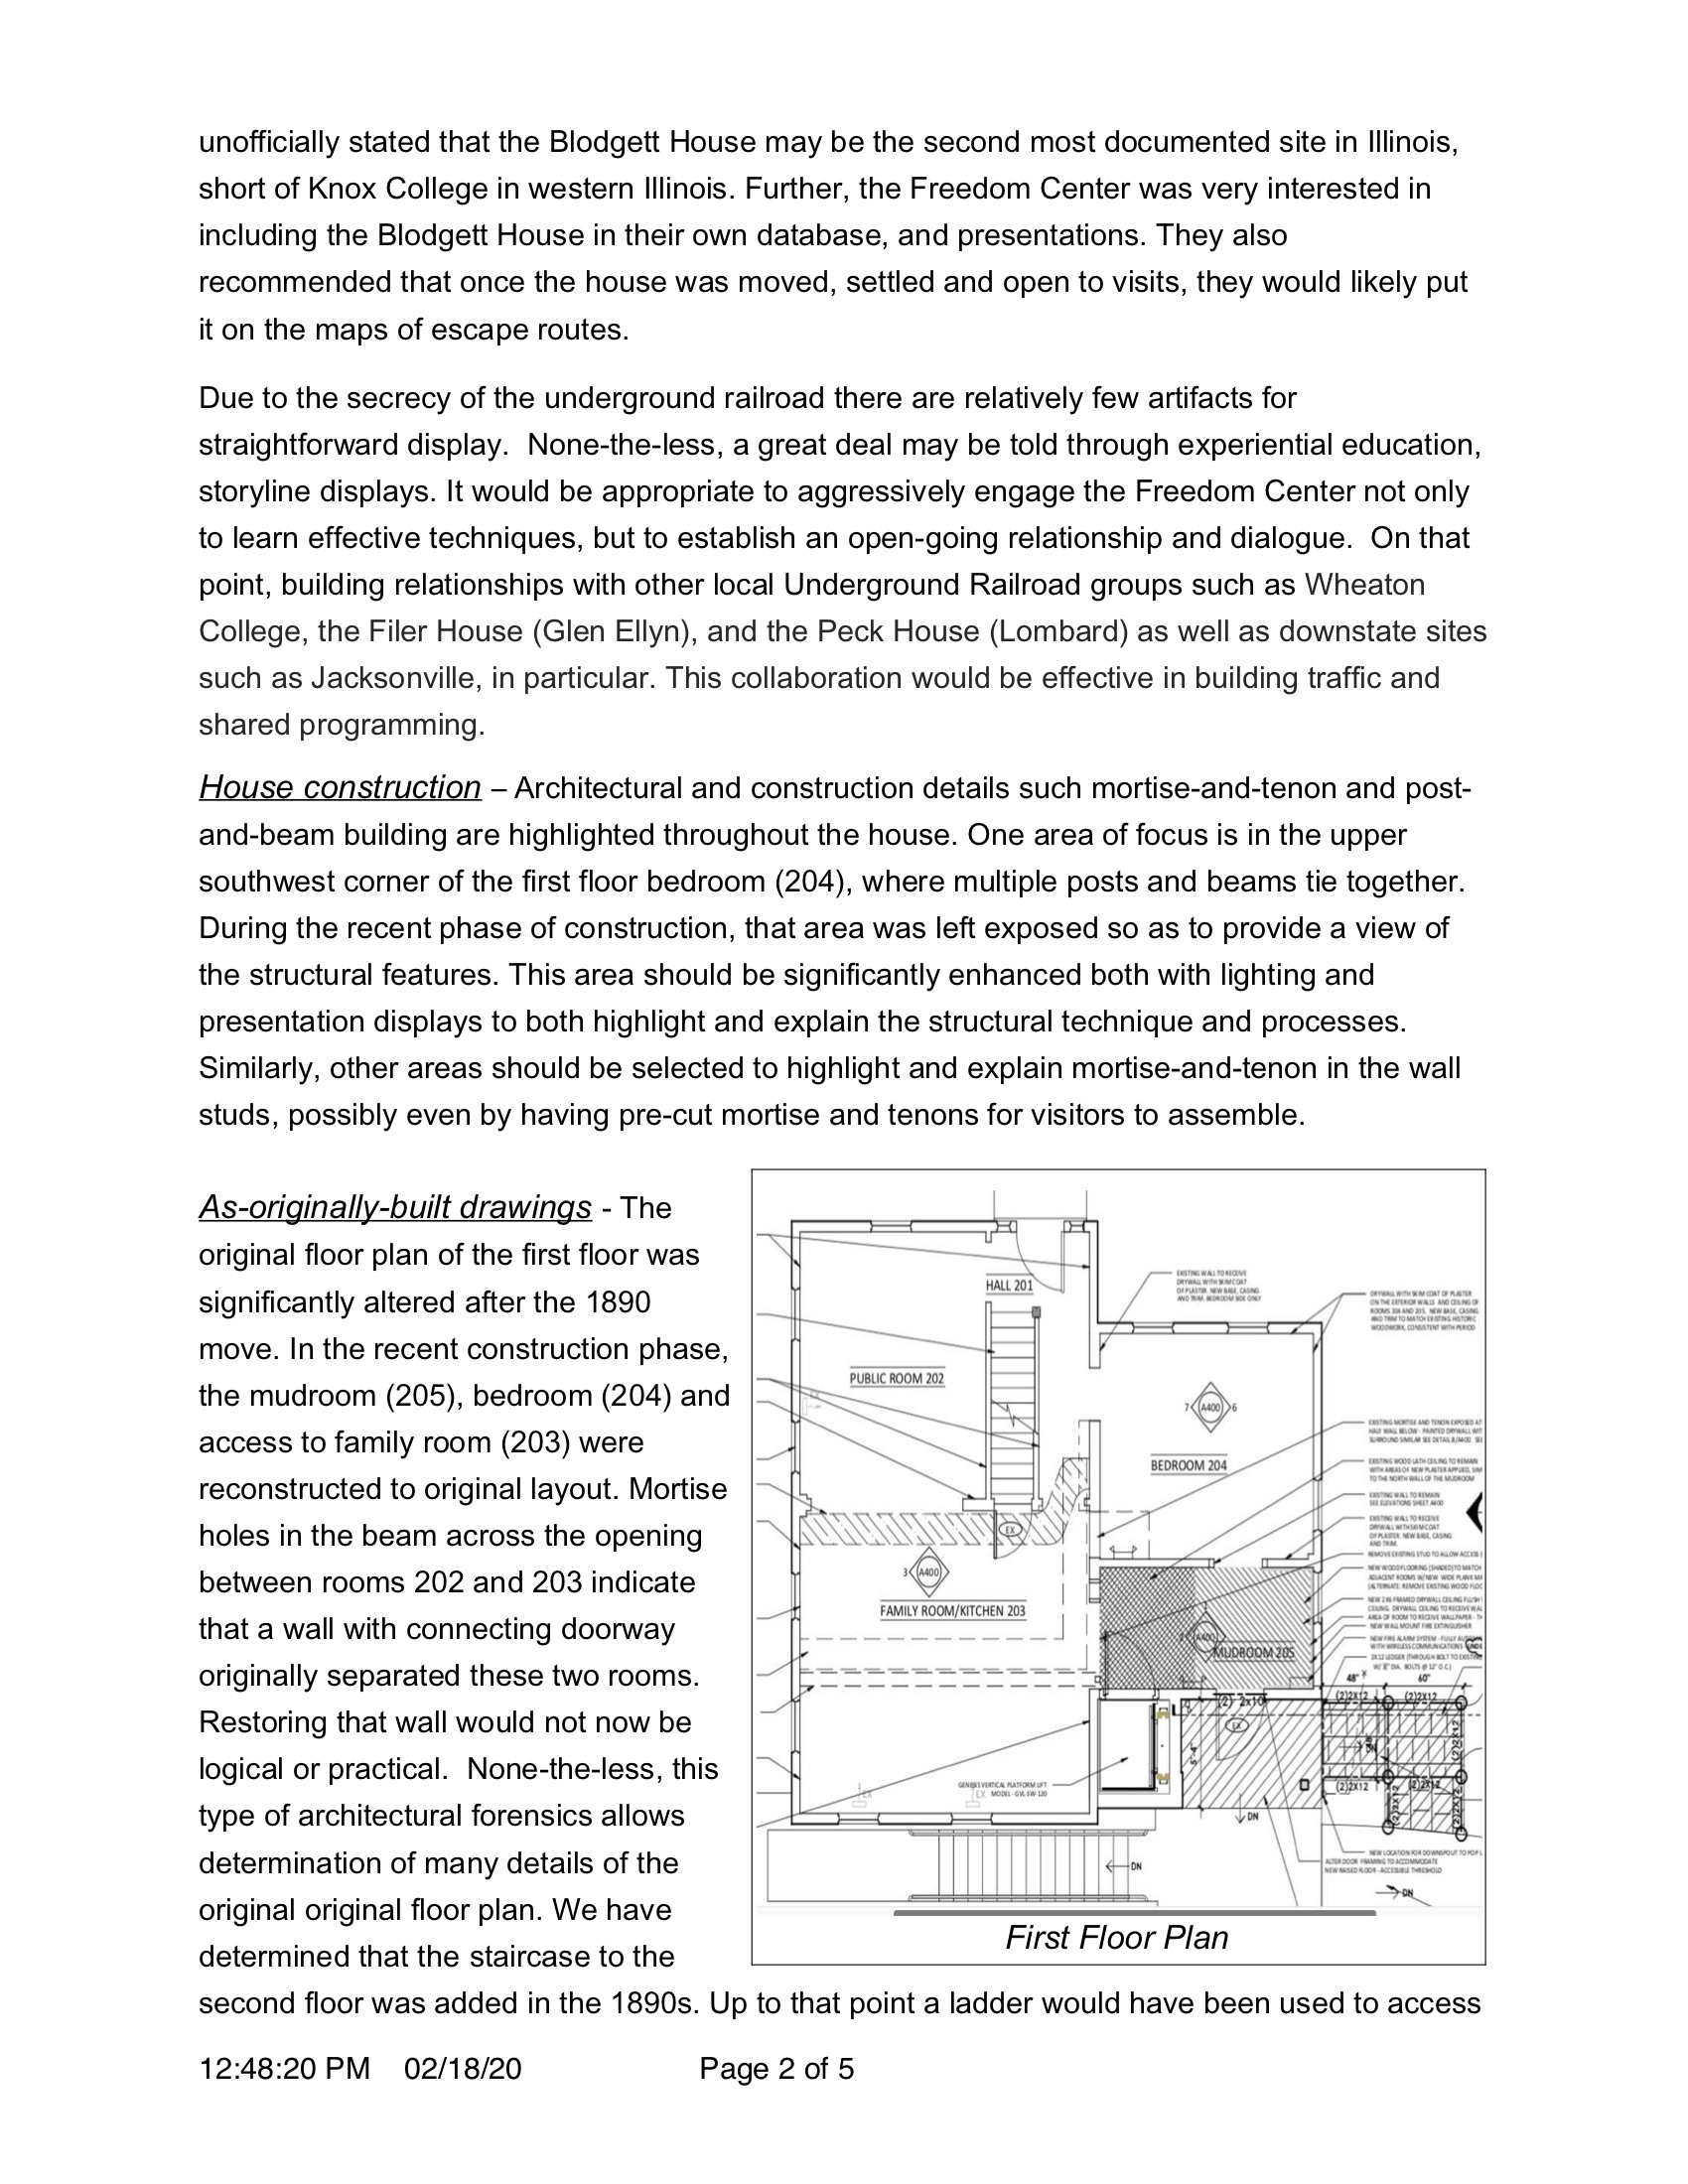 Vision & Approach page 2